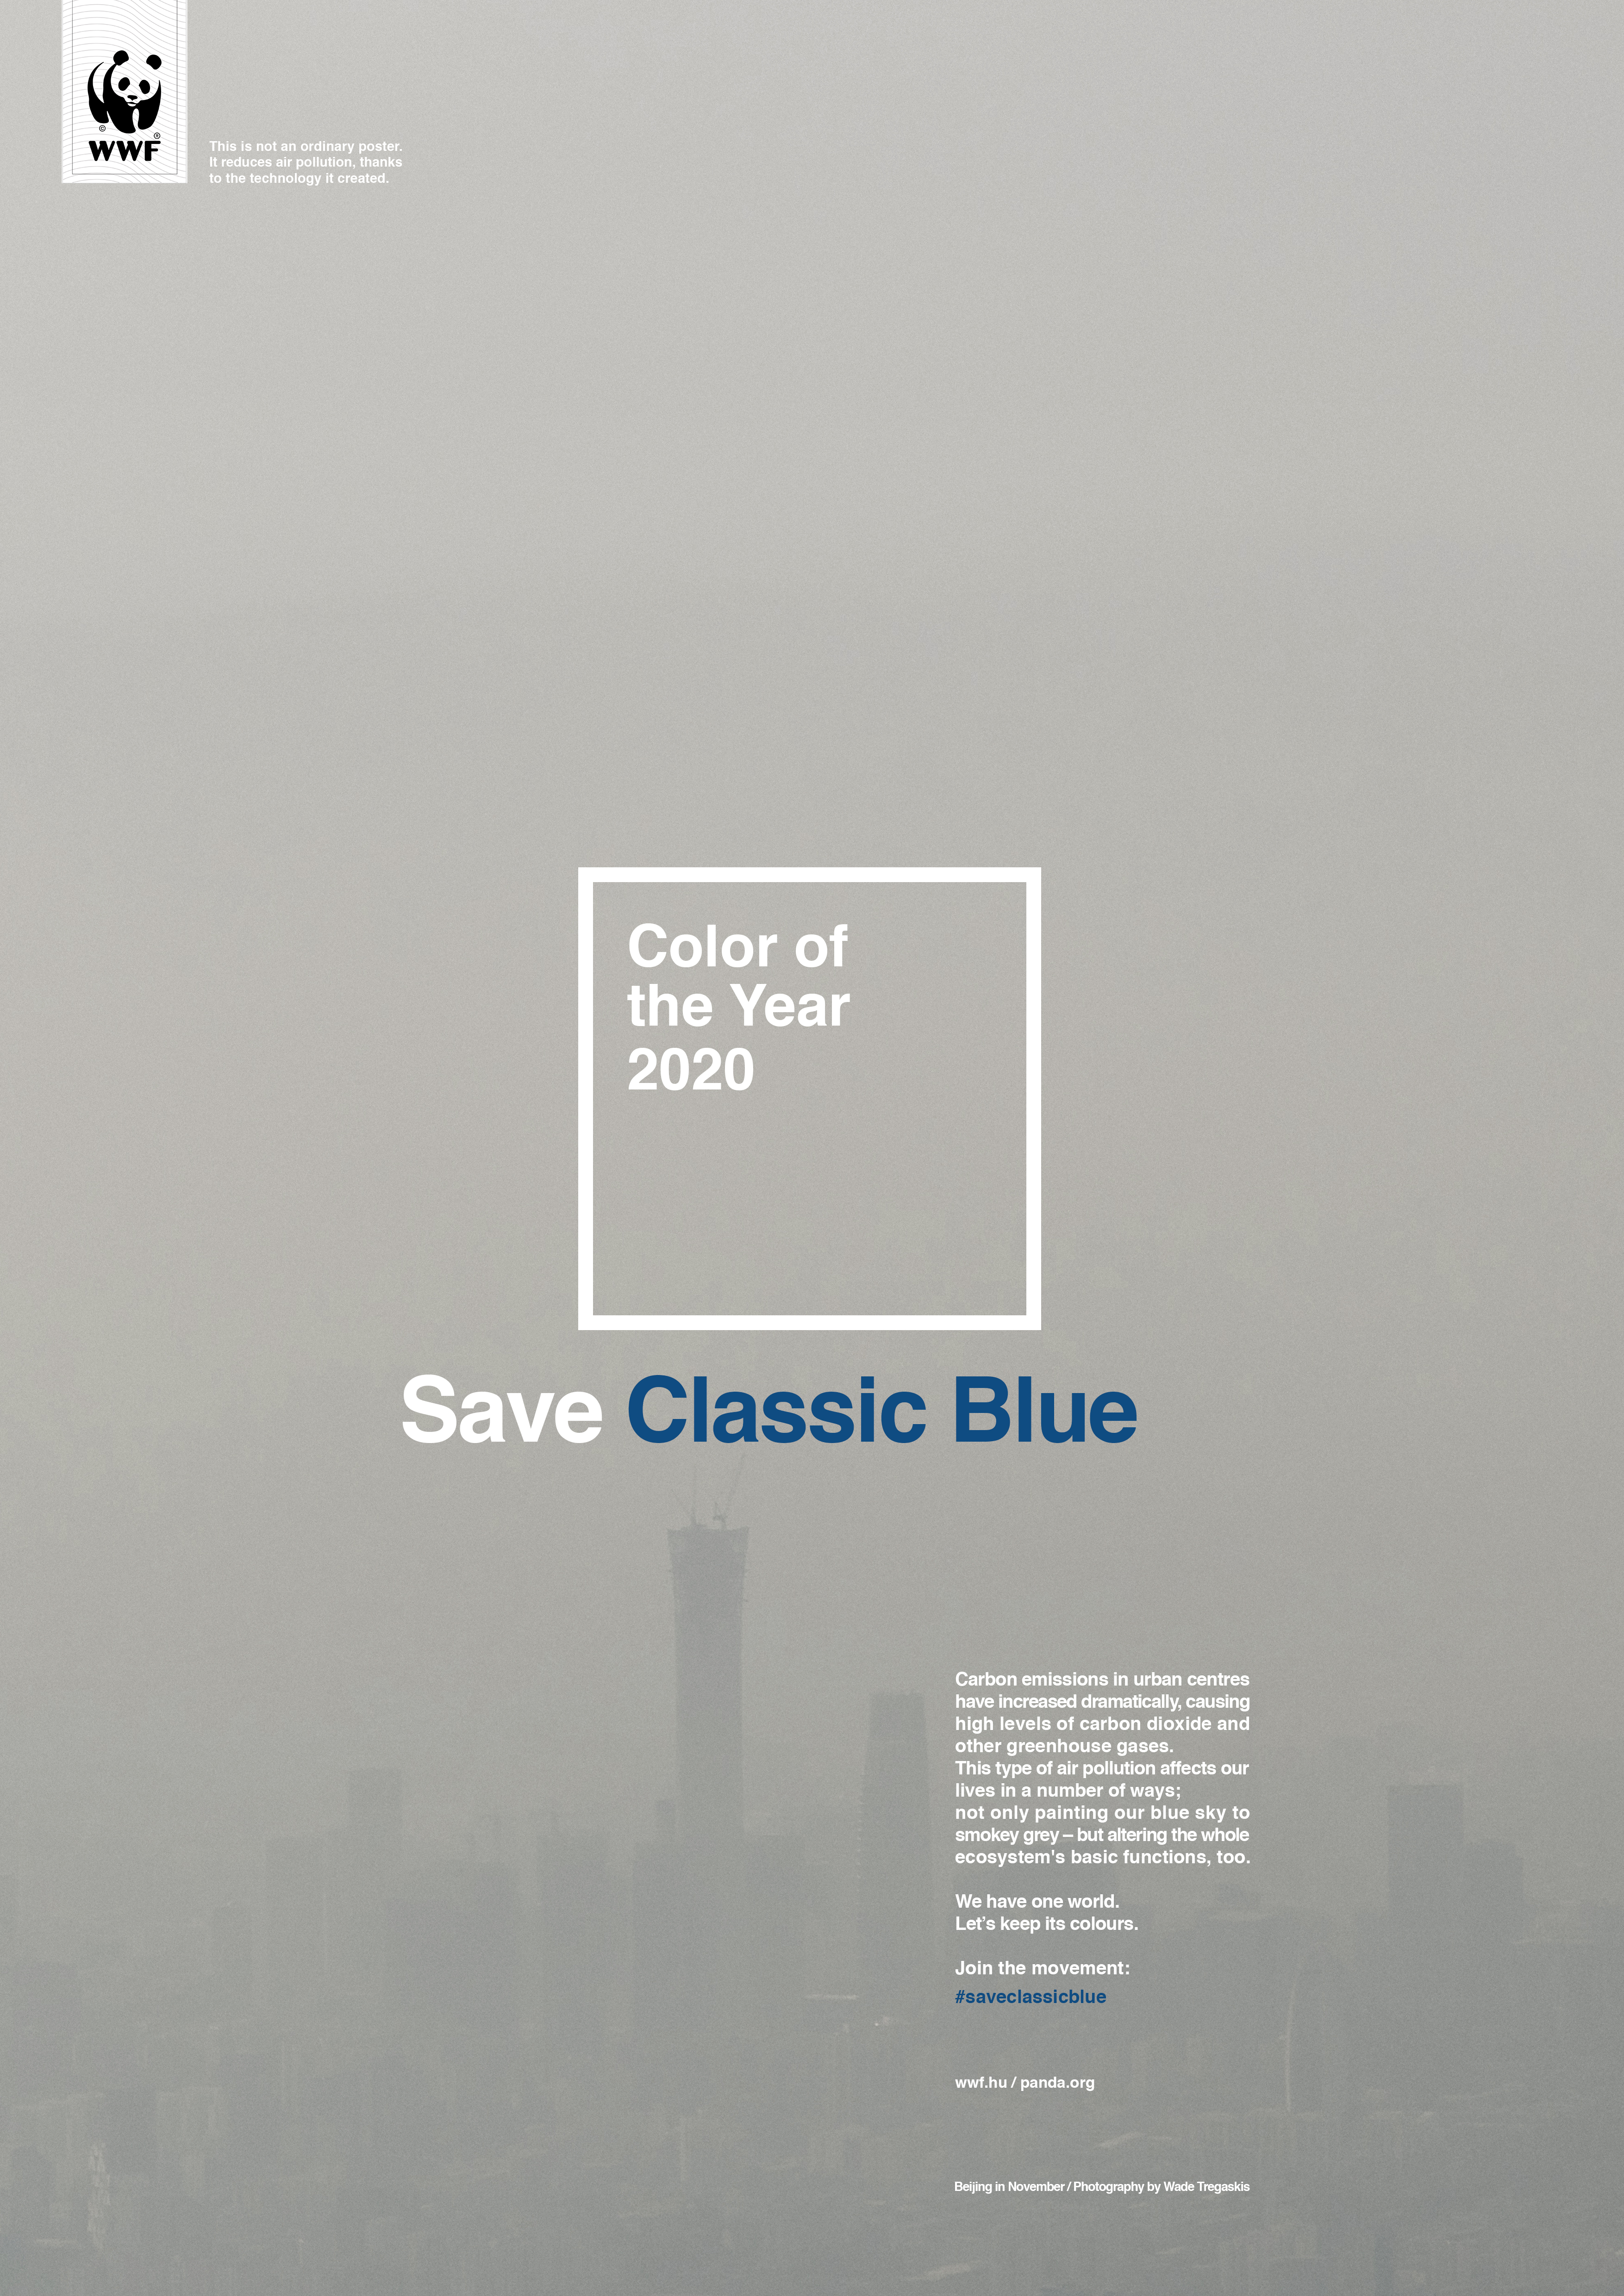 WWF Hungary Wants to save Pantone's Colour of the Year, Again